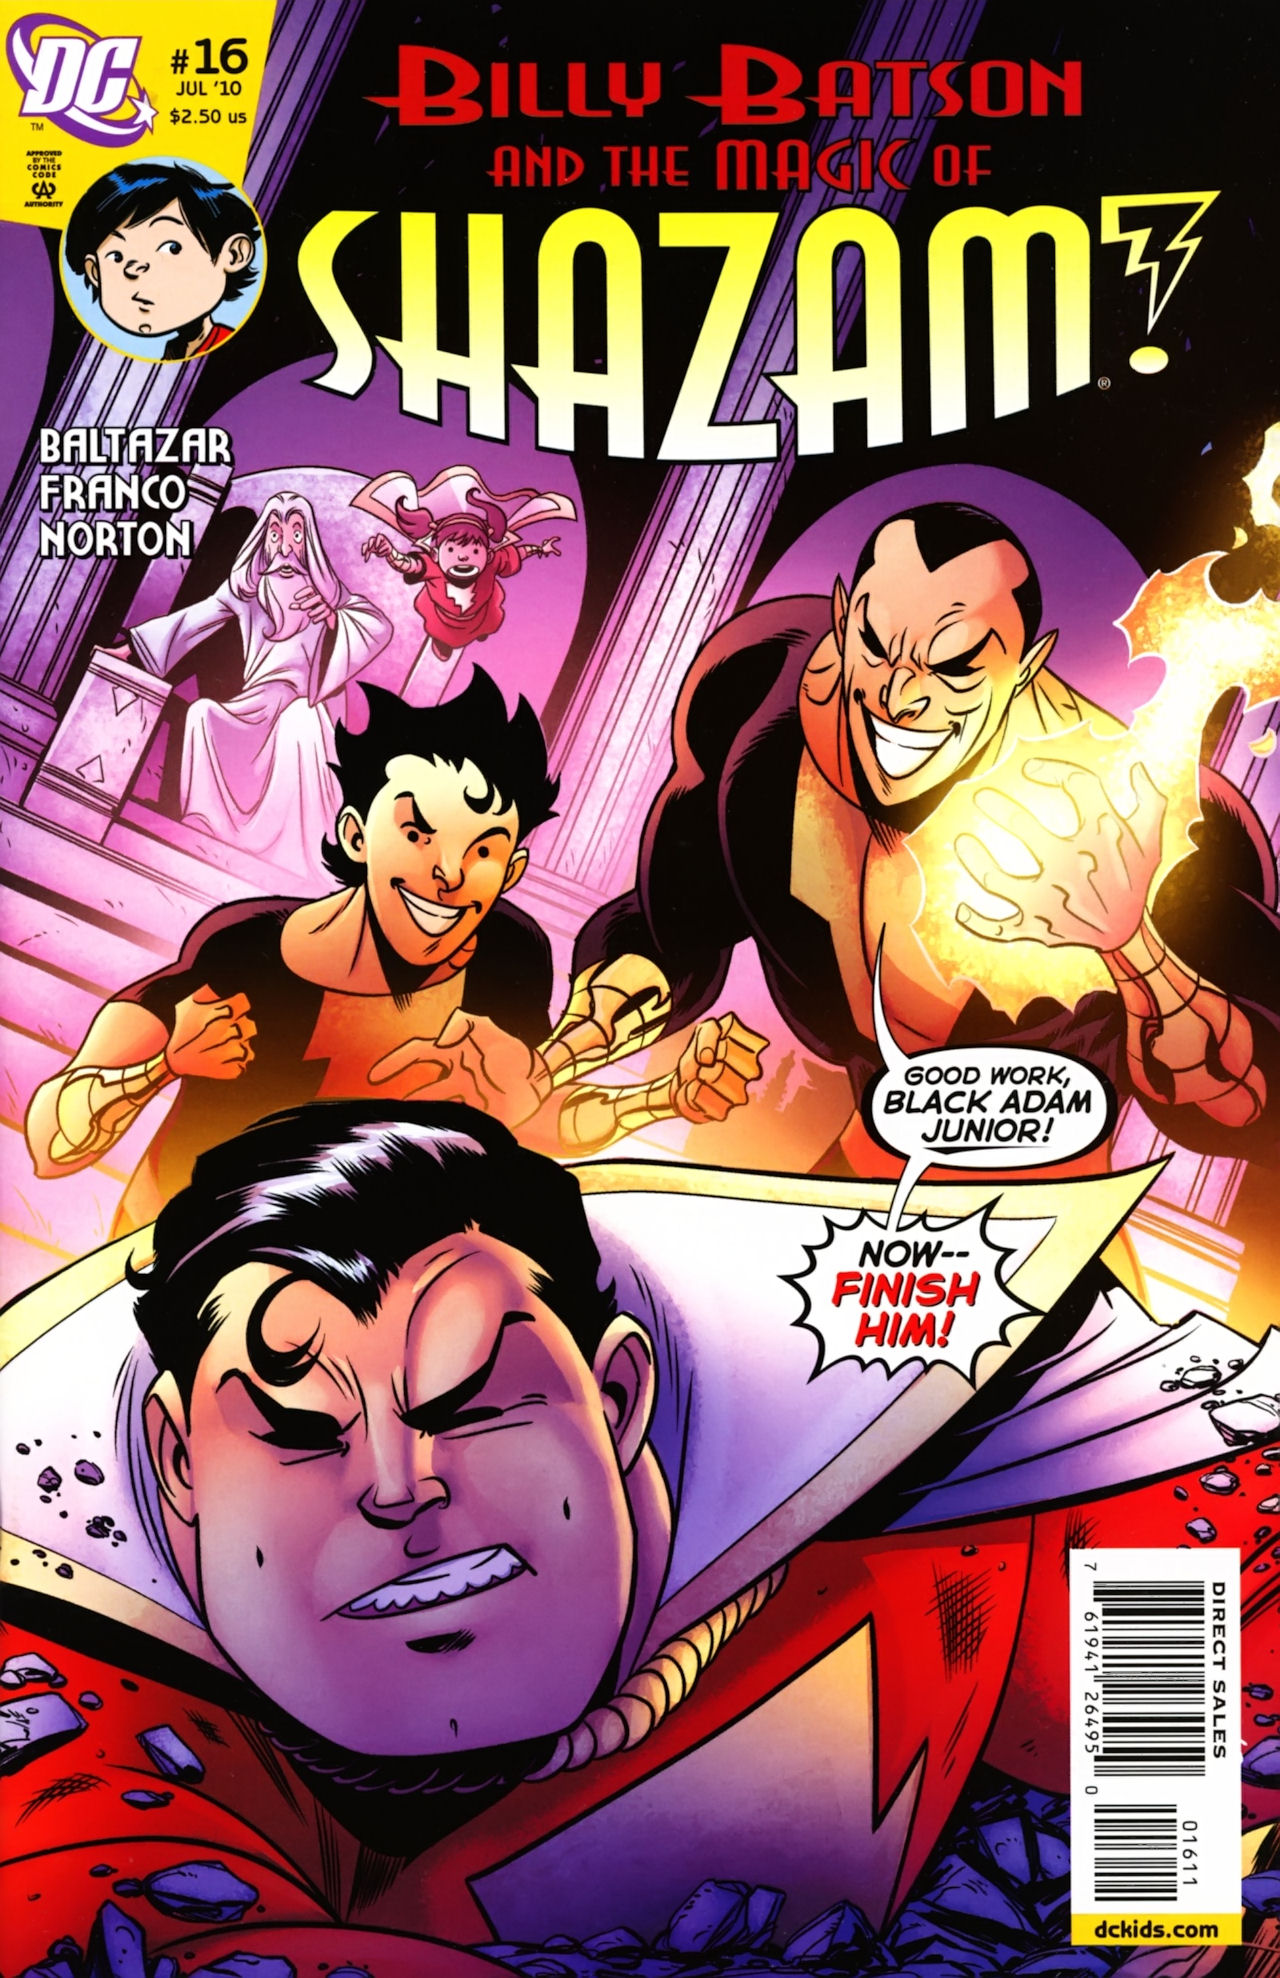 Read online Billy Batson & The Magic of Shazam! comic -  Issue #16 - 1